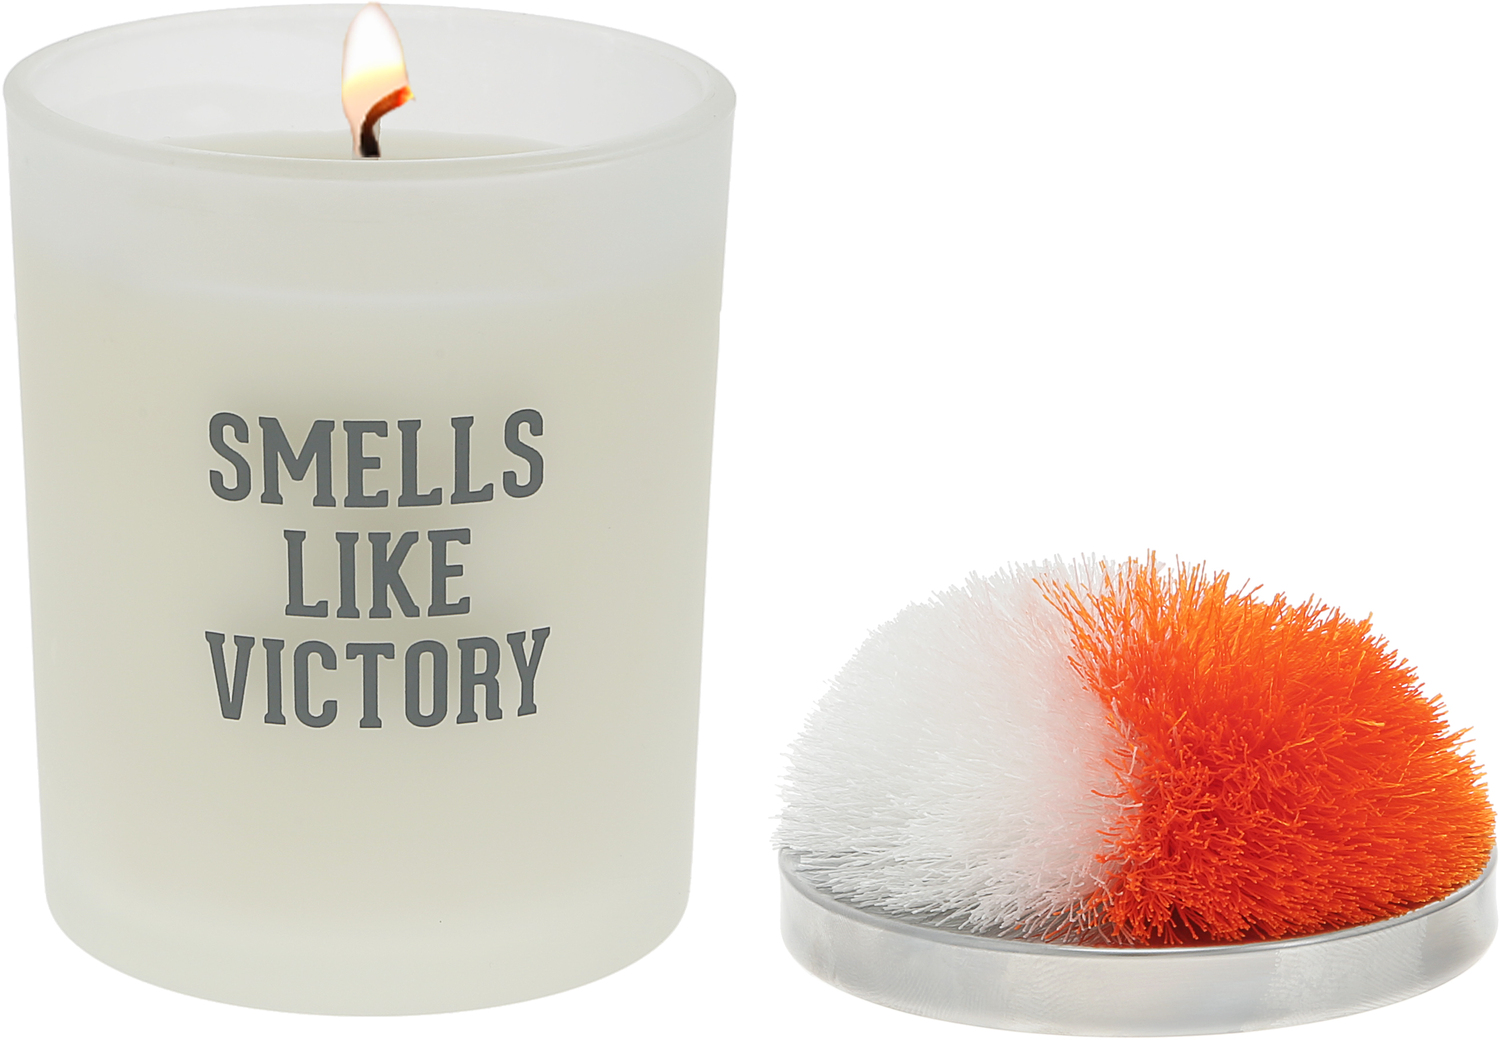 Victory - Orange & White by Repre-Scent - Victory - Orange & White - 5.5 oz - 100% Soy Wax Candle with Pom Pom Lid
Scent: Tranquility